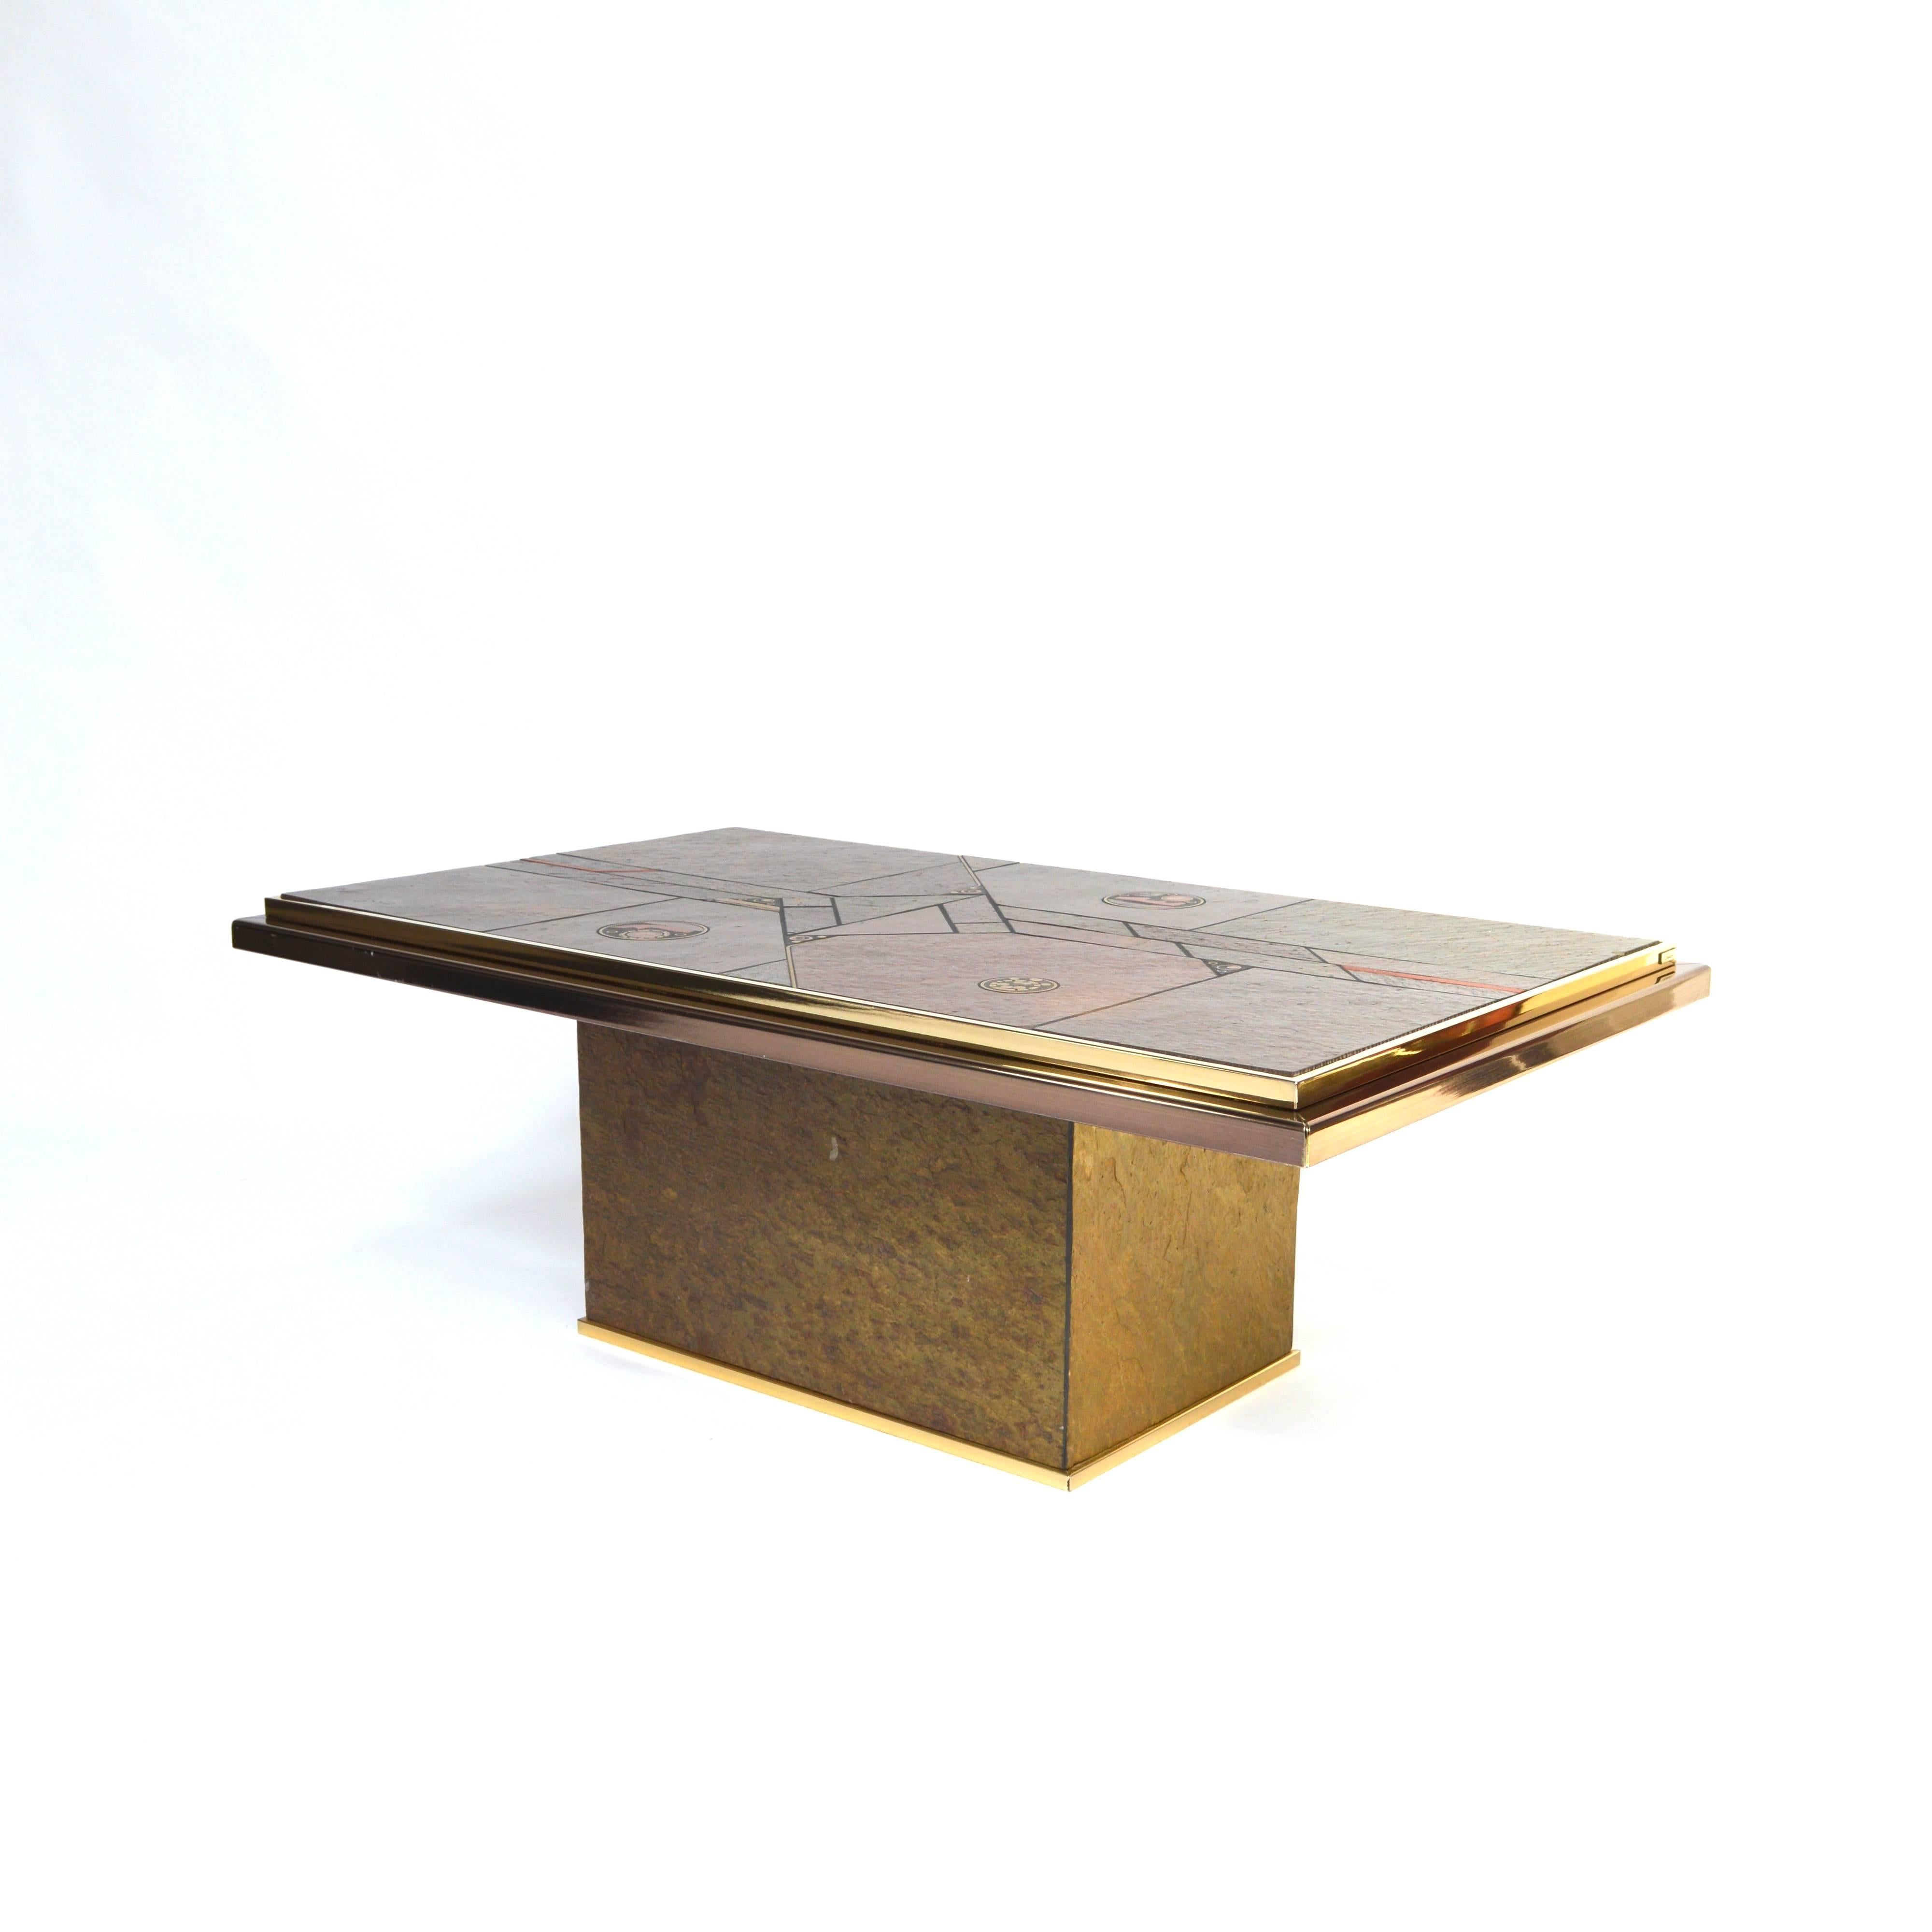 Brutalist coffee table in the style of Paul Kingma and manufactured by Fedam. It has a beautiful stone and brass mosaic top and brass edges. The sides of the base are also covered with stone.
The condition is good to excellent. Small damage to the